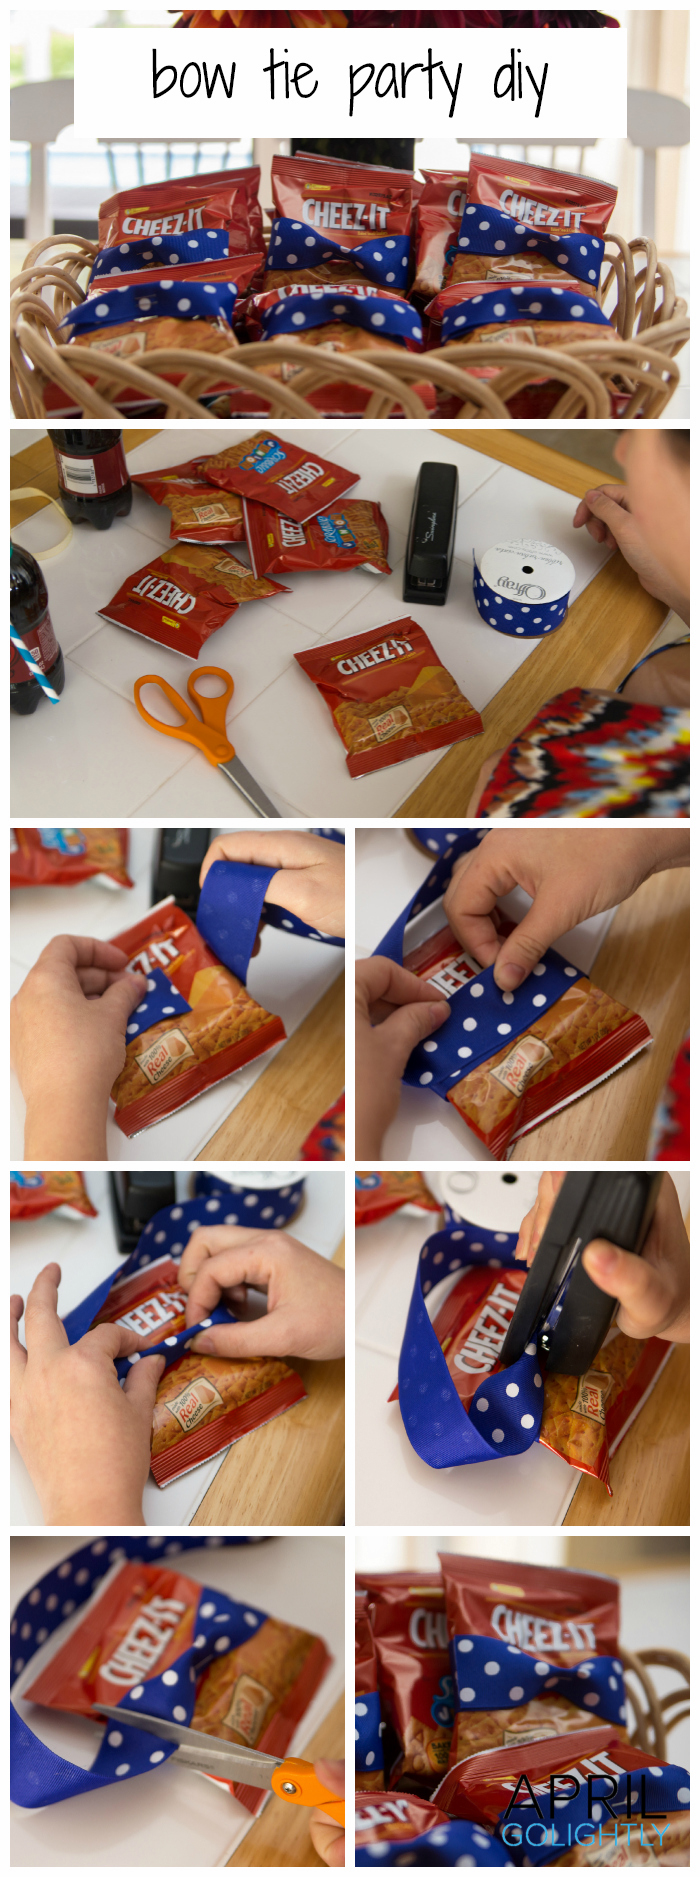 Bow Tie Party DIY affordable party decorations for Cheez-its #shop